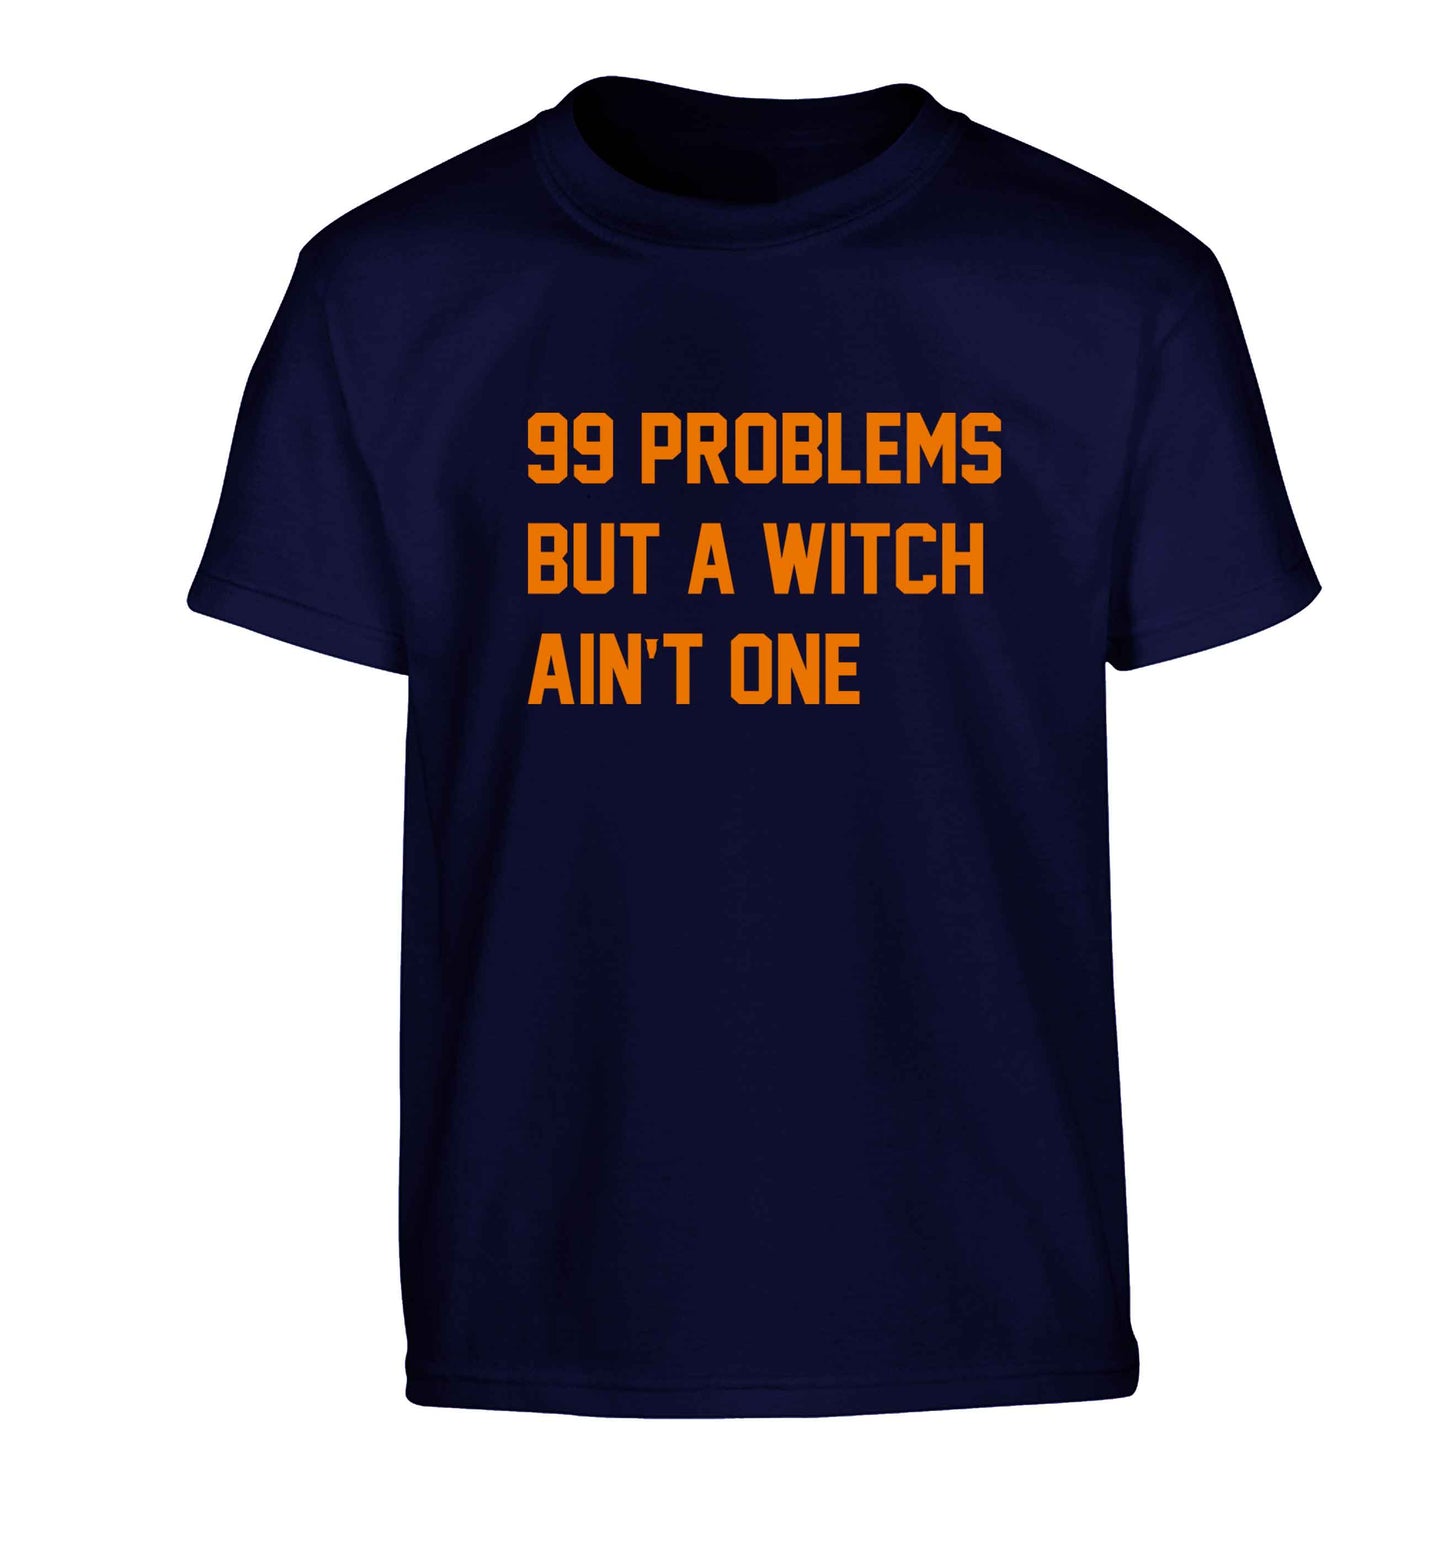 99 Problems but a witch aint one Children's navy Tshirt 12-13 Years